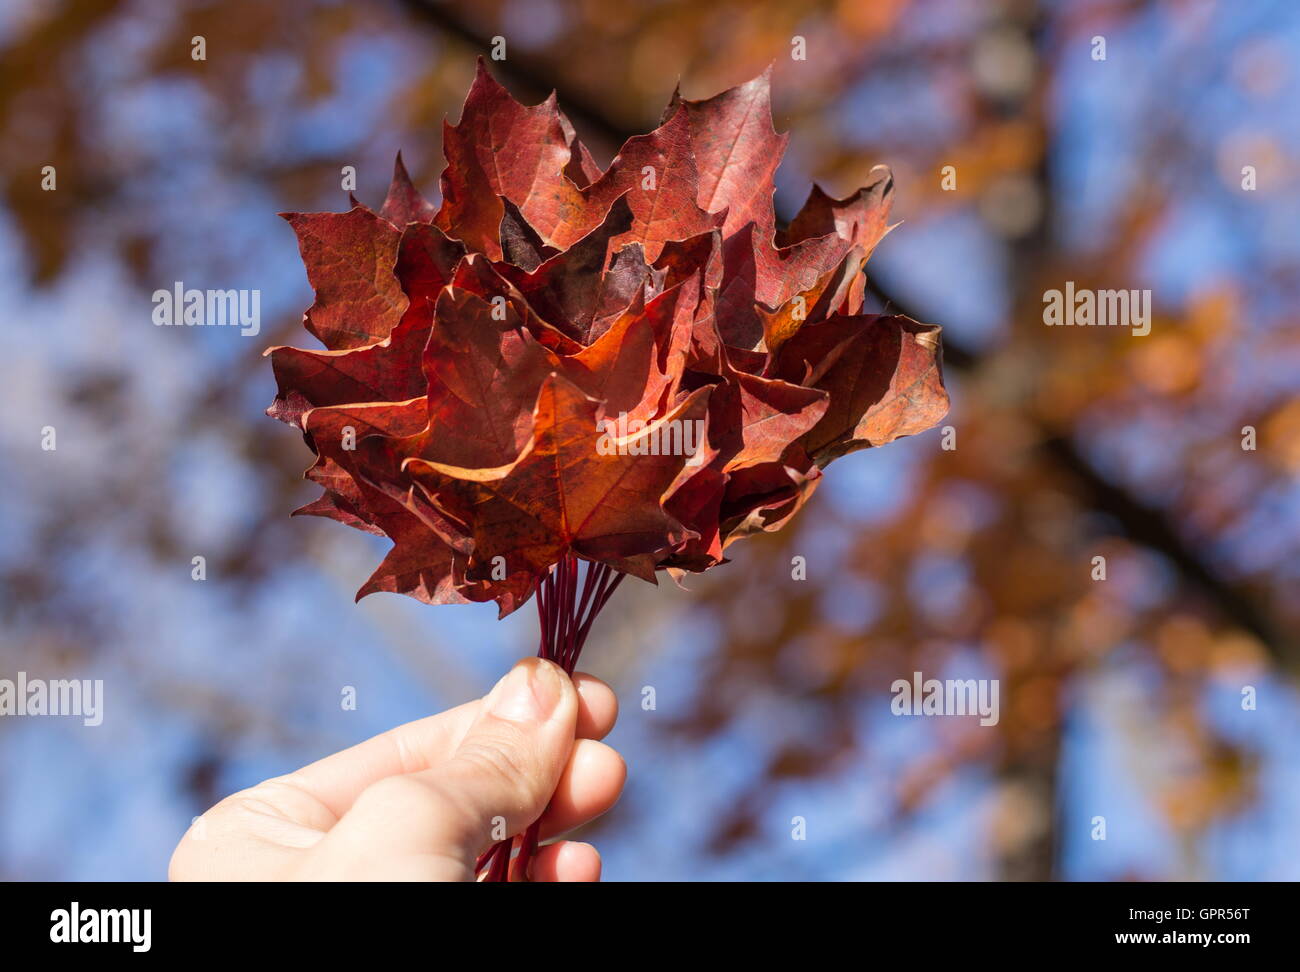 Red autumn leaves in womans hand. Fall season Stock Photo